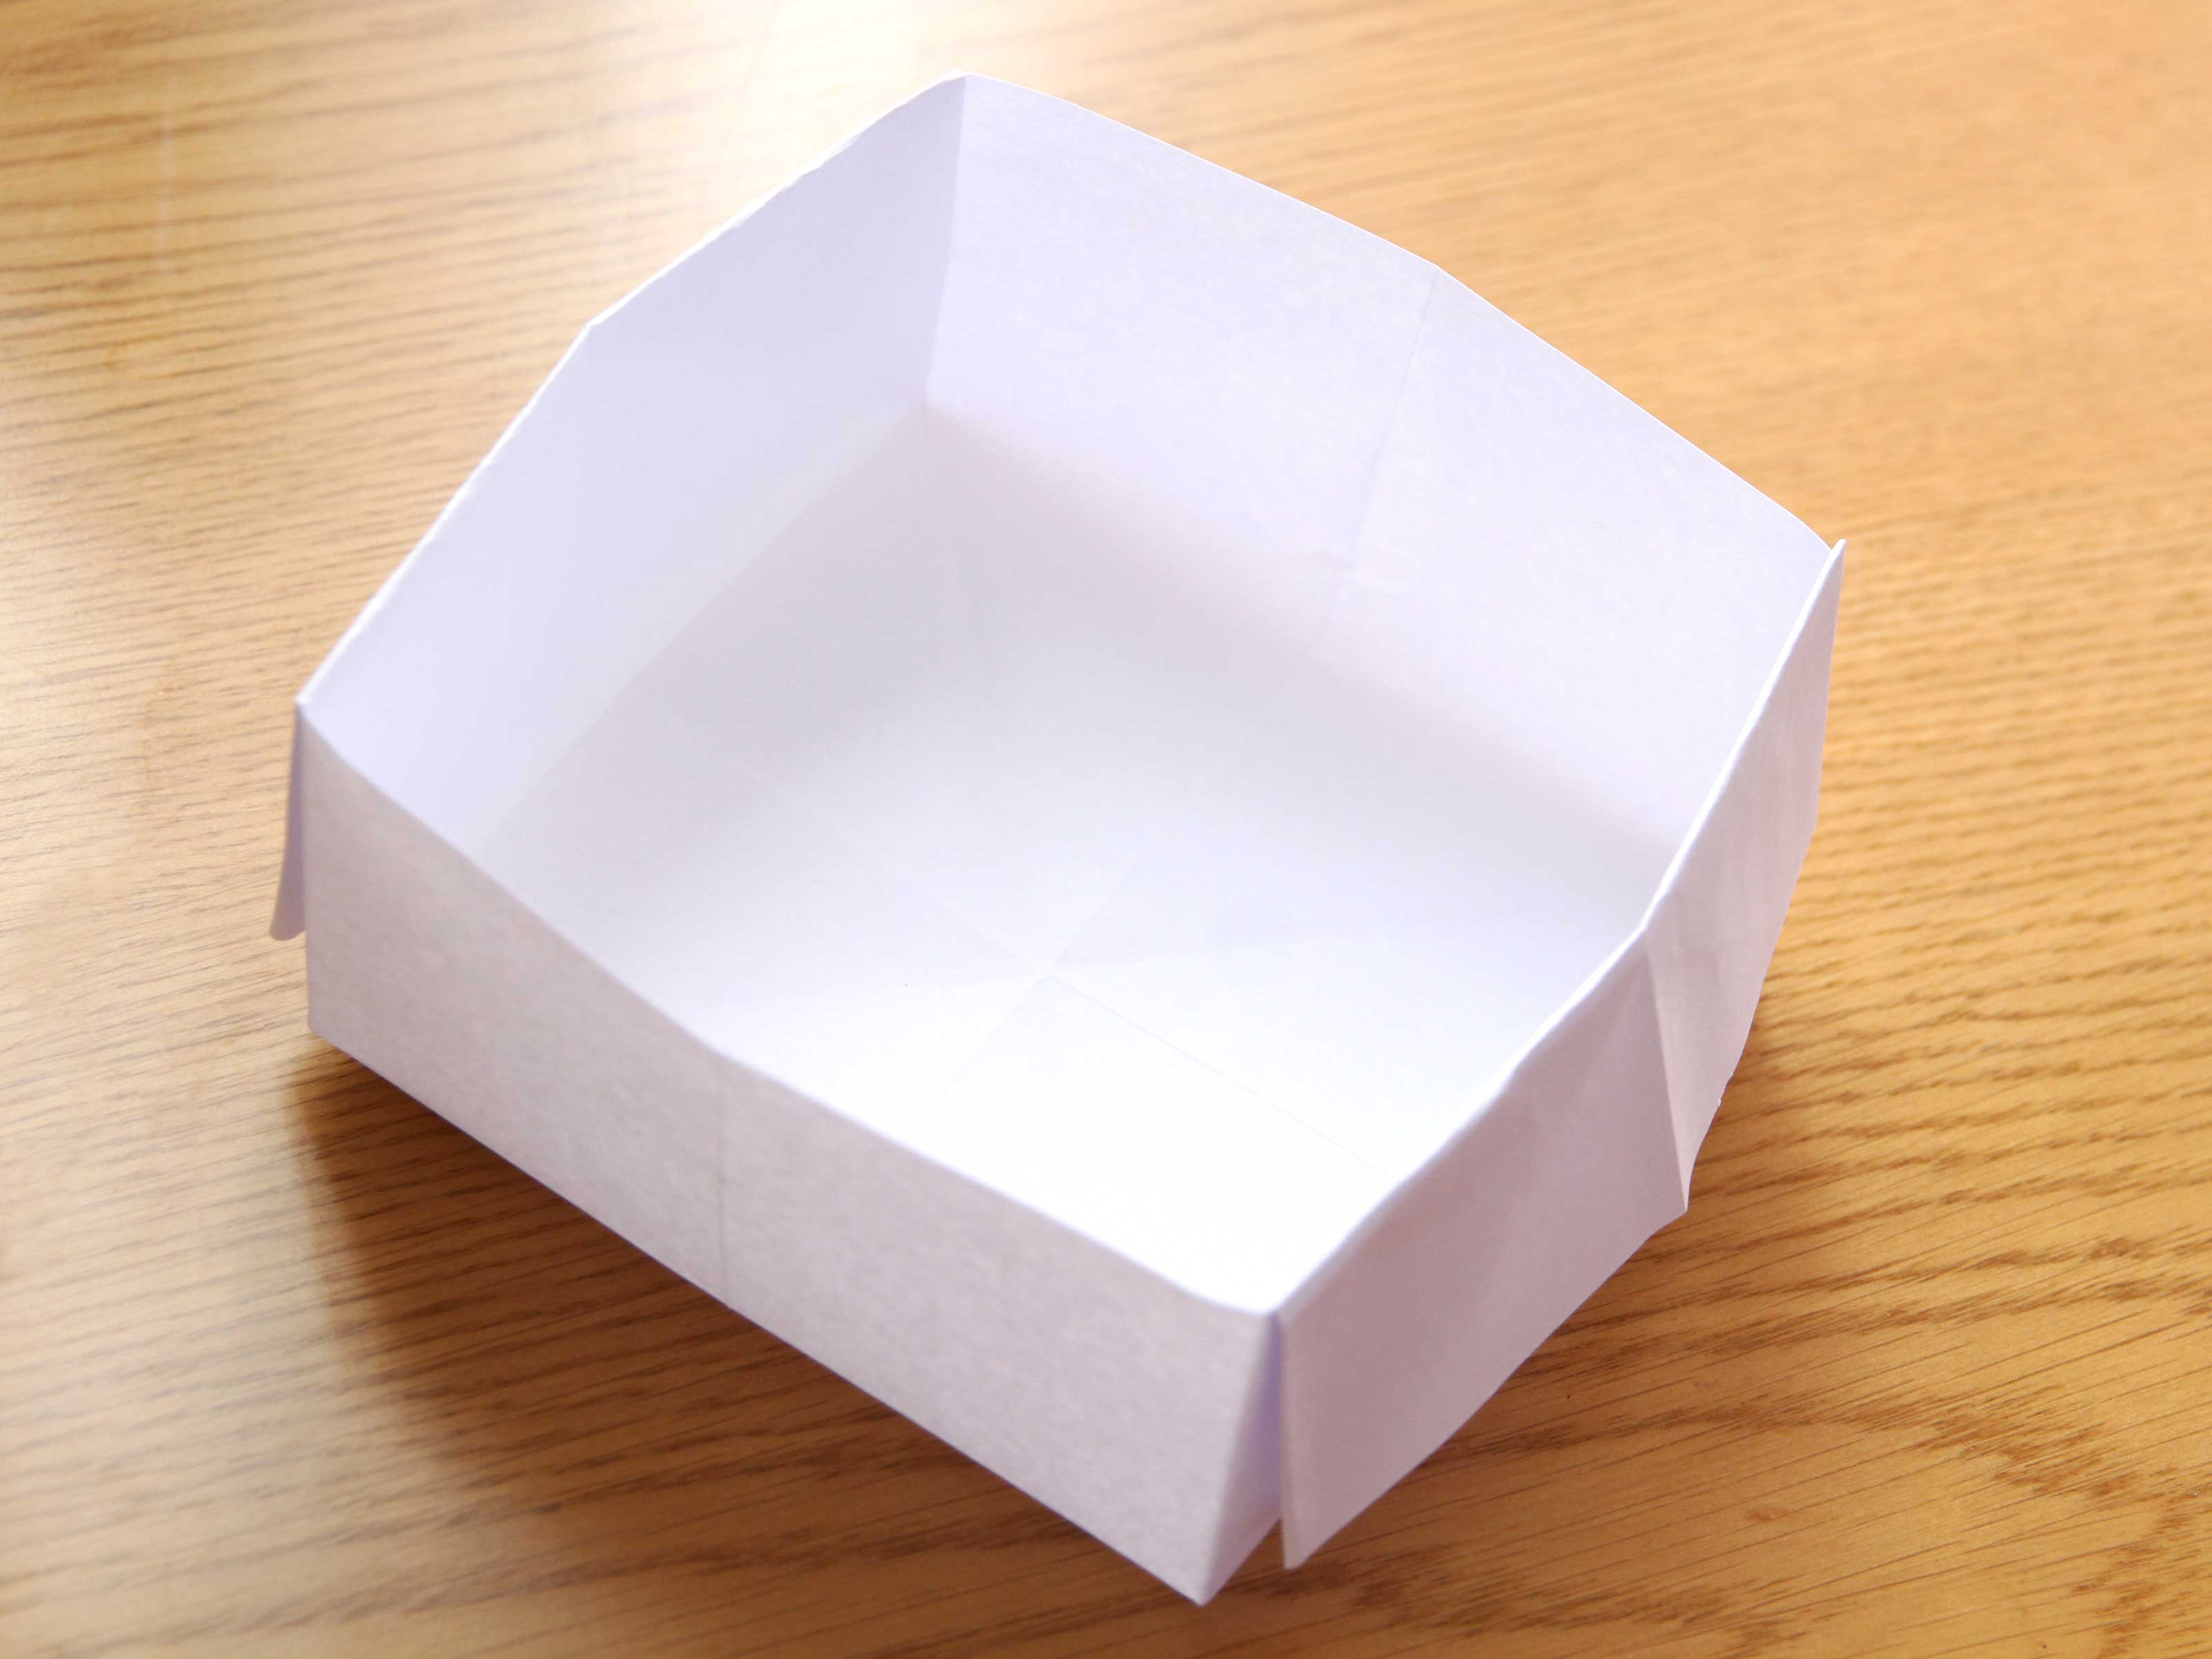 How To Make Origami Box Easy How To Make An Origami Box With Printer Paper 12 Steps